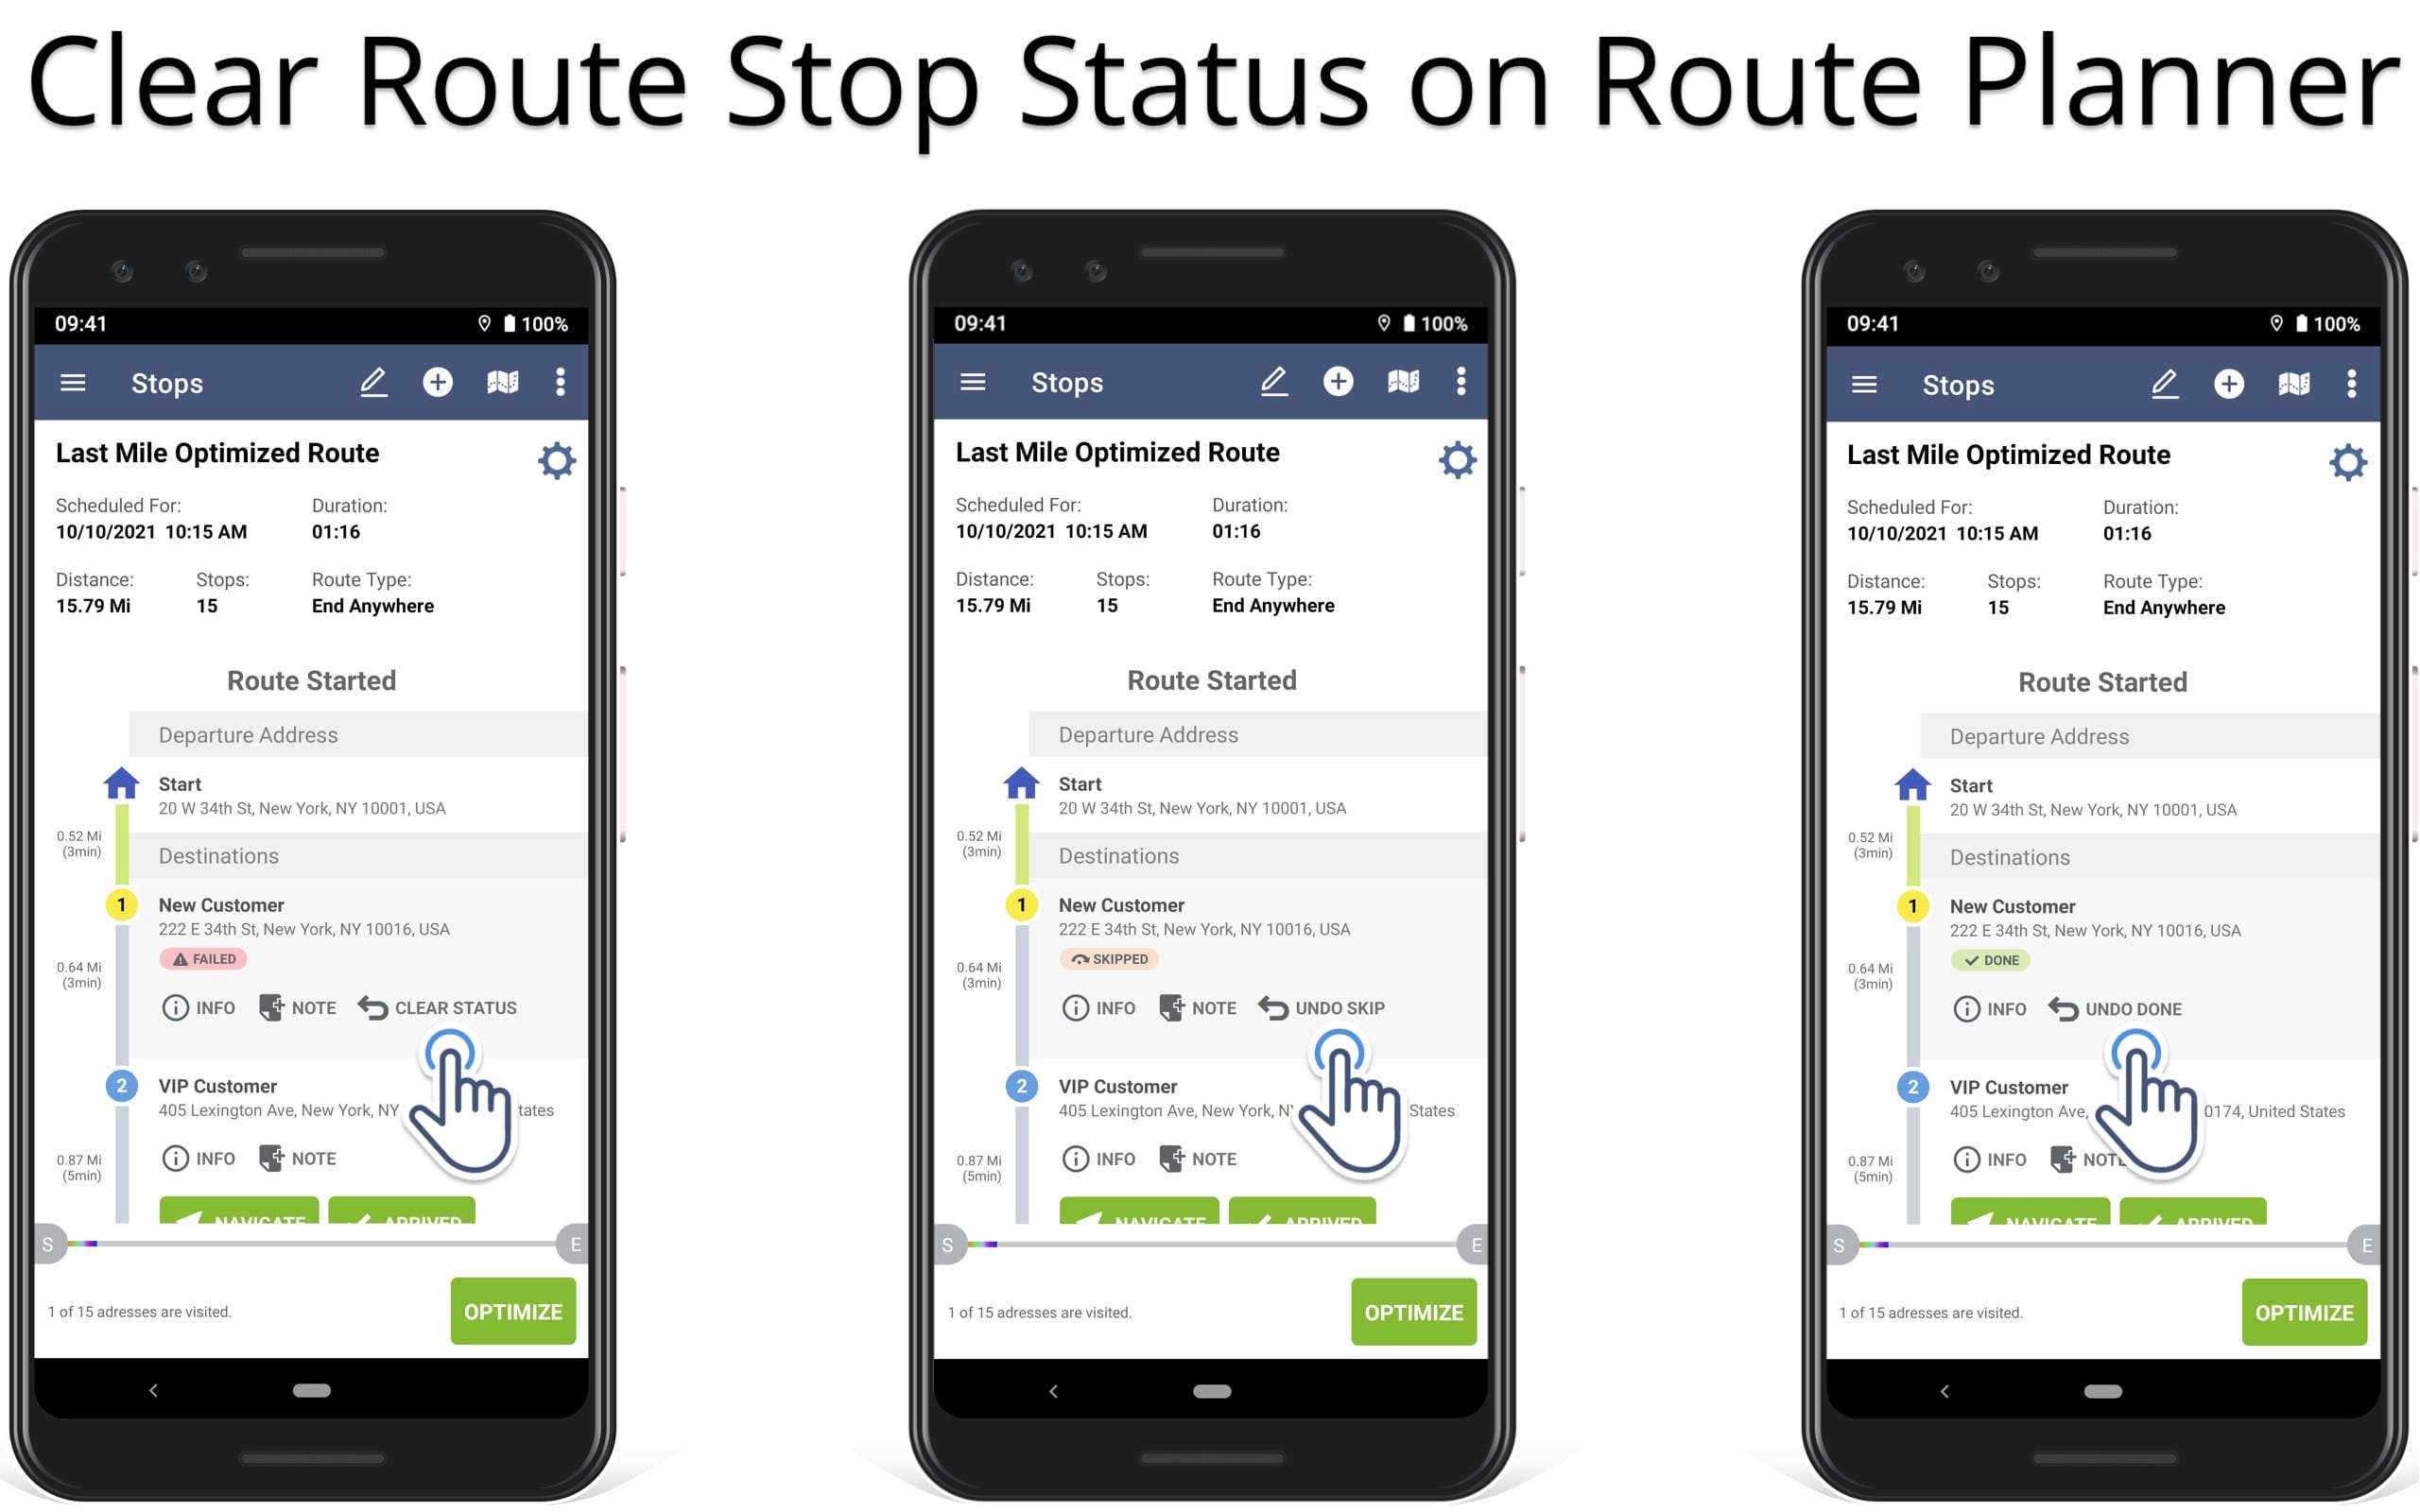 Clear delivery status for failed orders, skipped stops and done visits on route planner app.